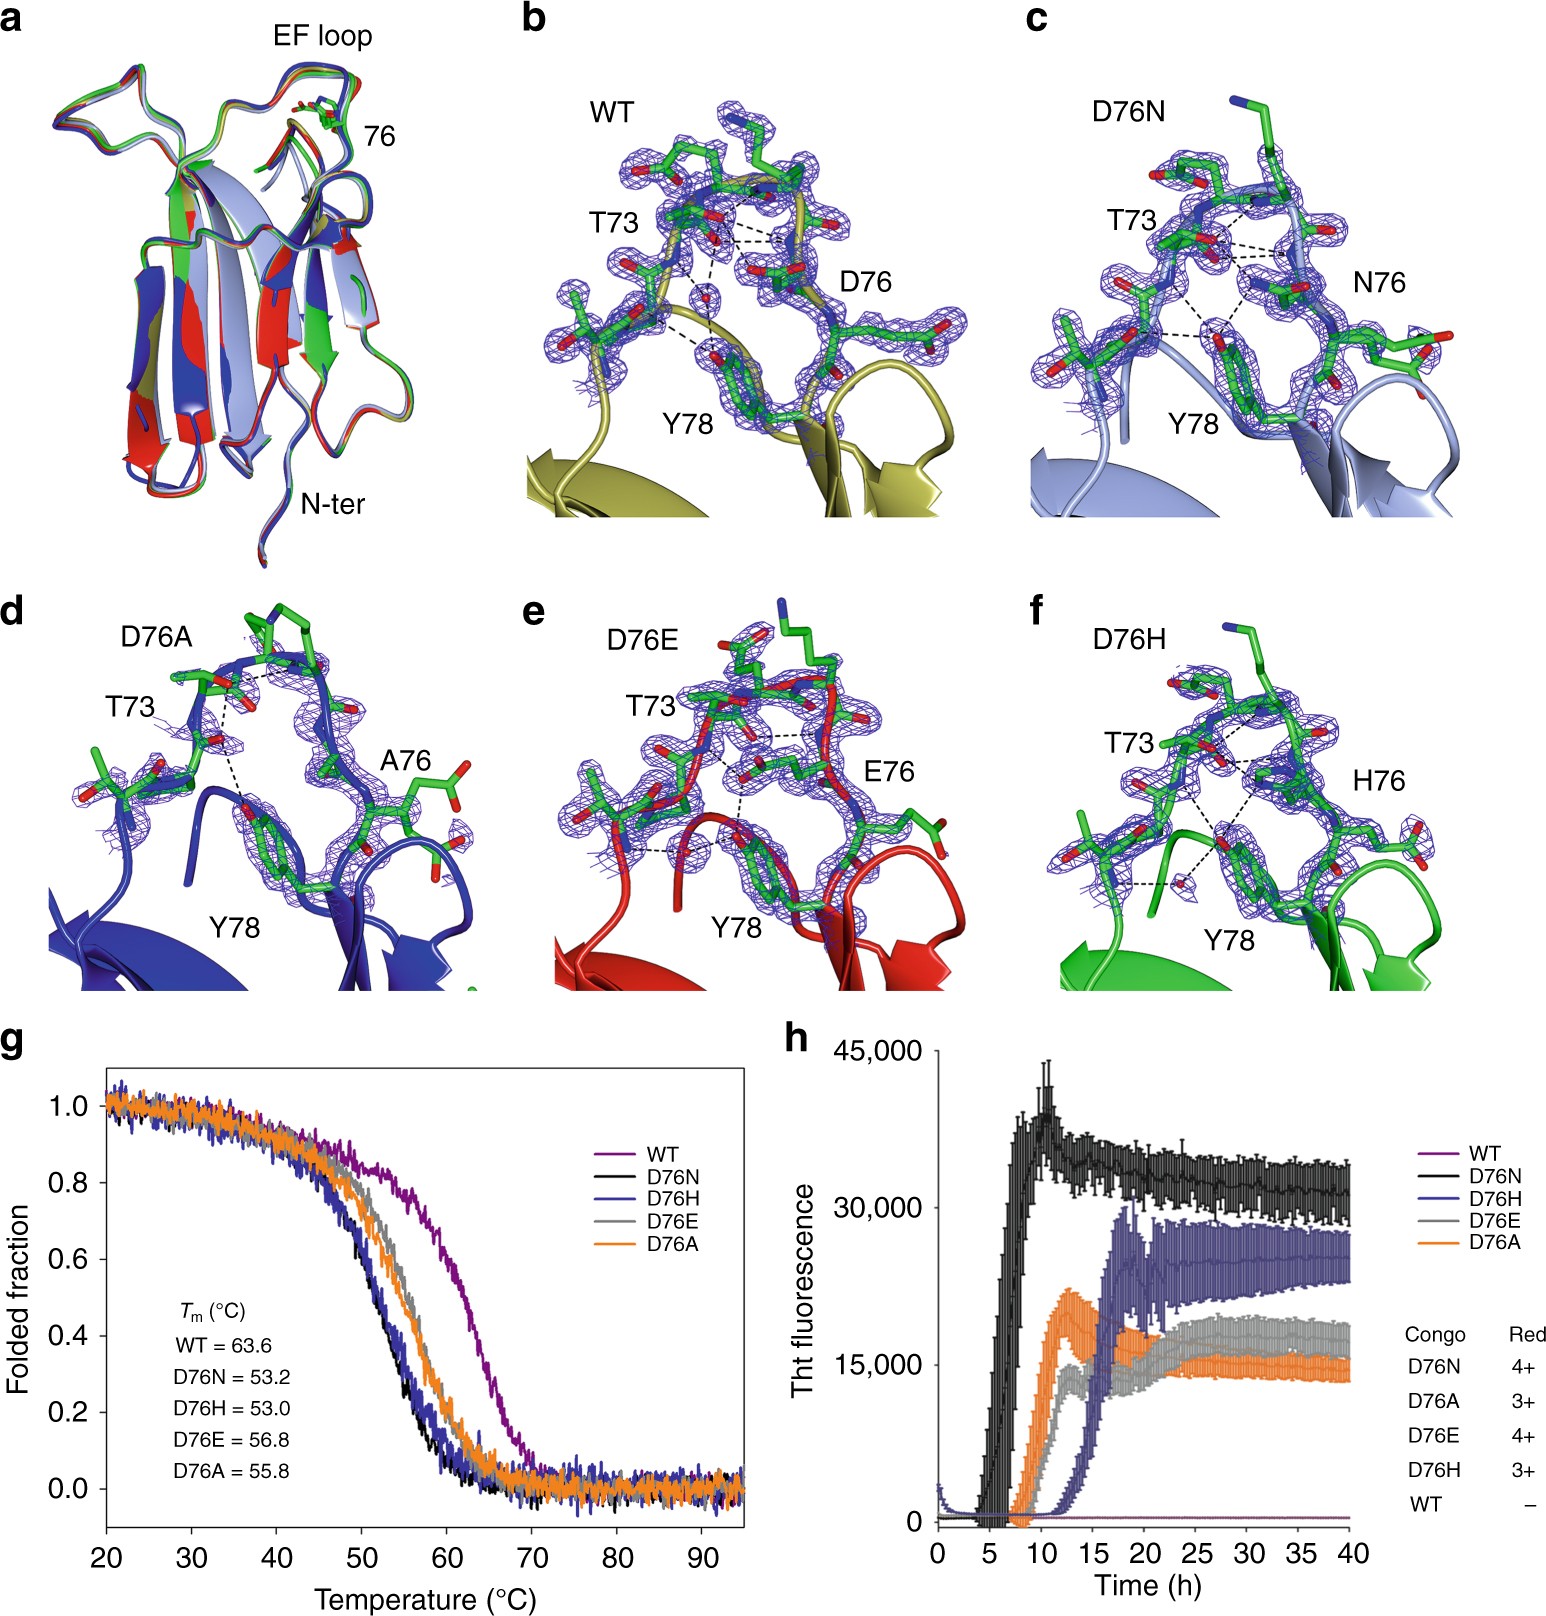 Conformational dynamics in crystals reveal the molecular bases for D76N  beta-2 microglobulin aggregation propensity | Nature Communications